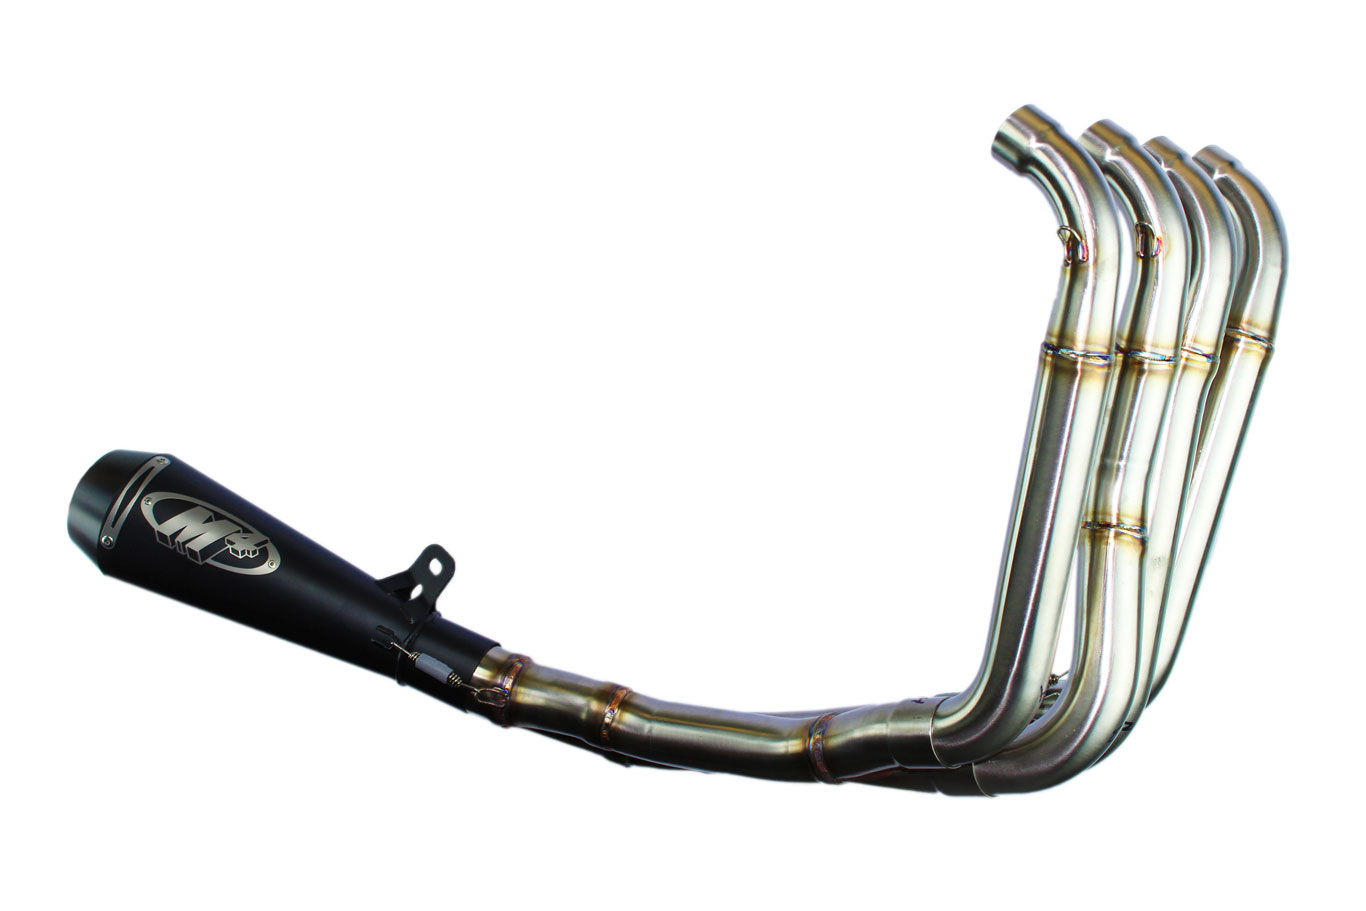 Black GP Full Exhaust w/ Stainless Tubing - For 05-06 Suzuki GSXR1000 - Click Image to Close